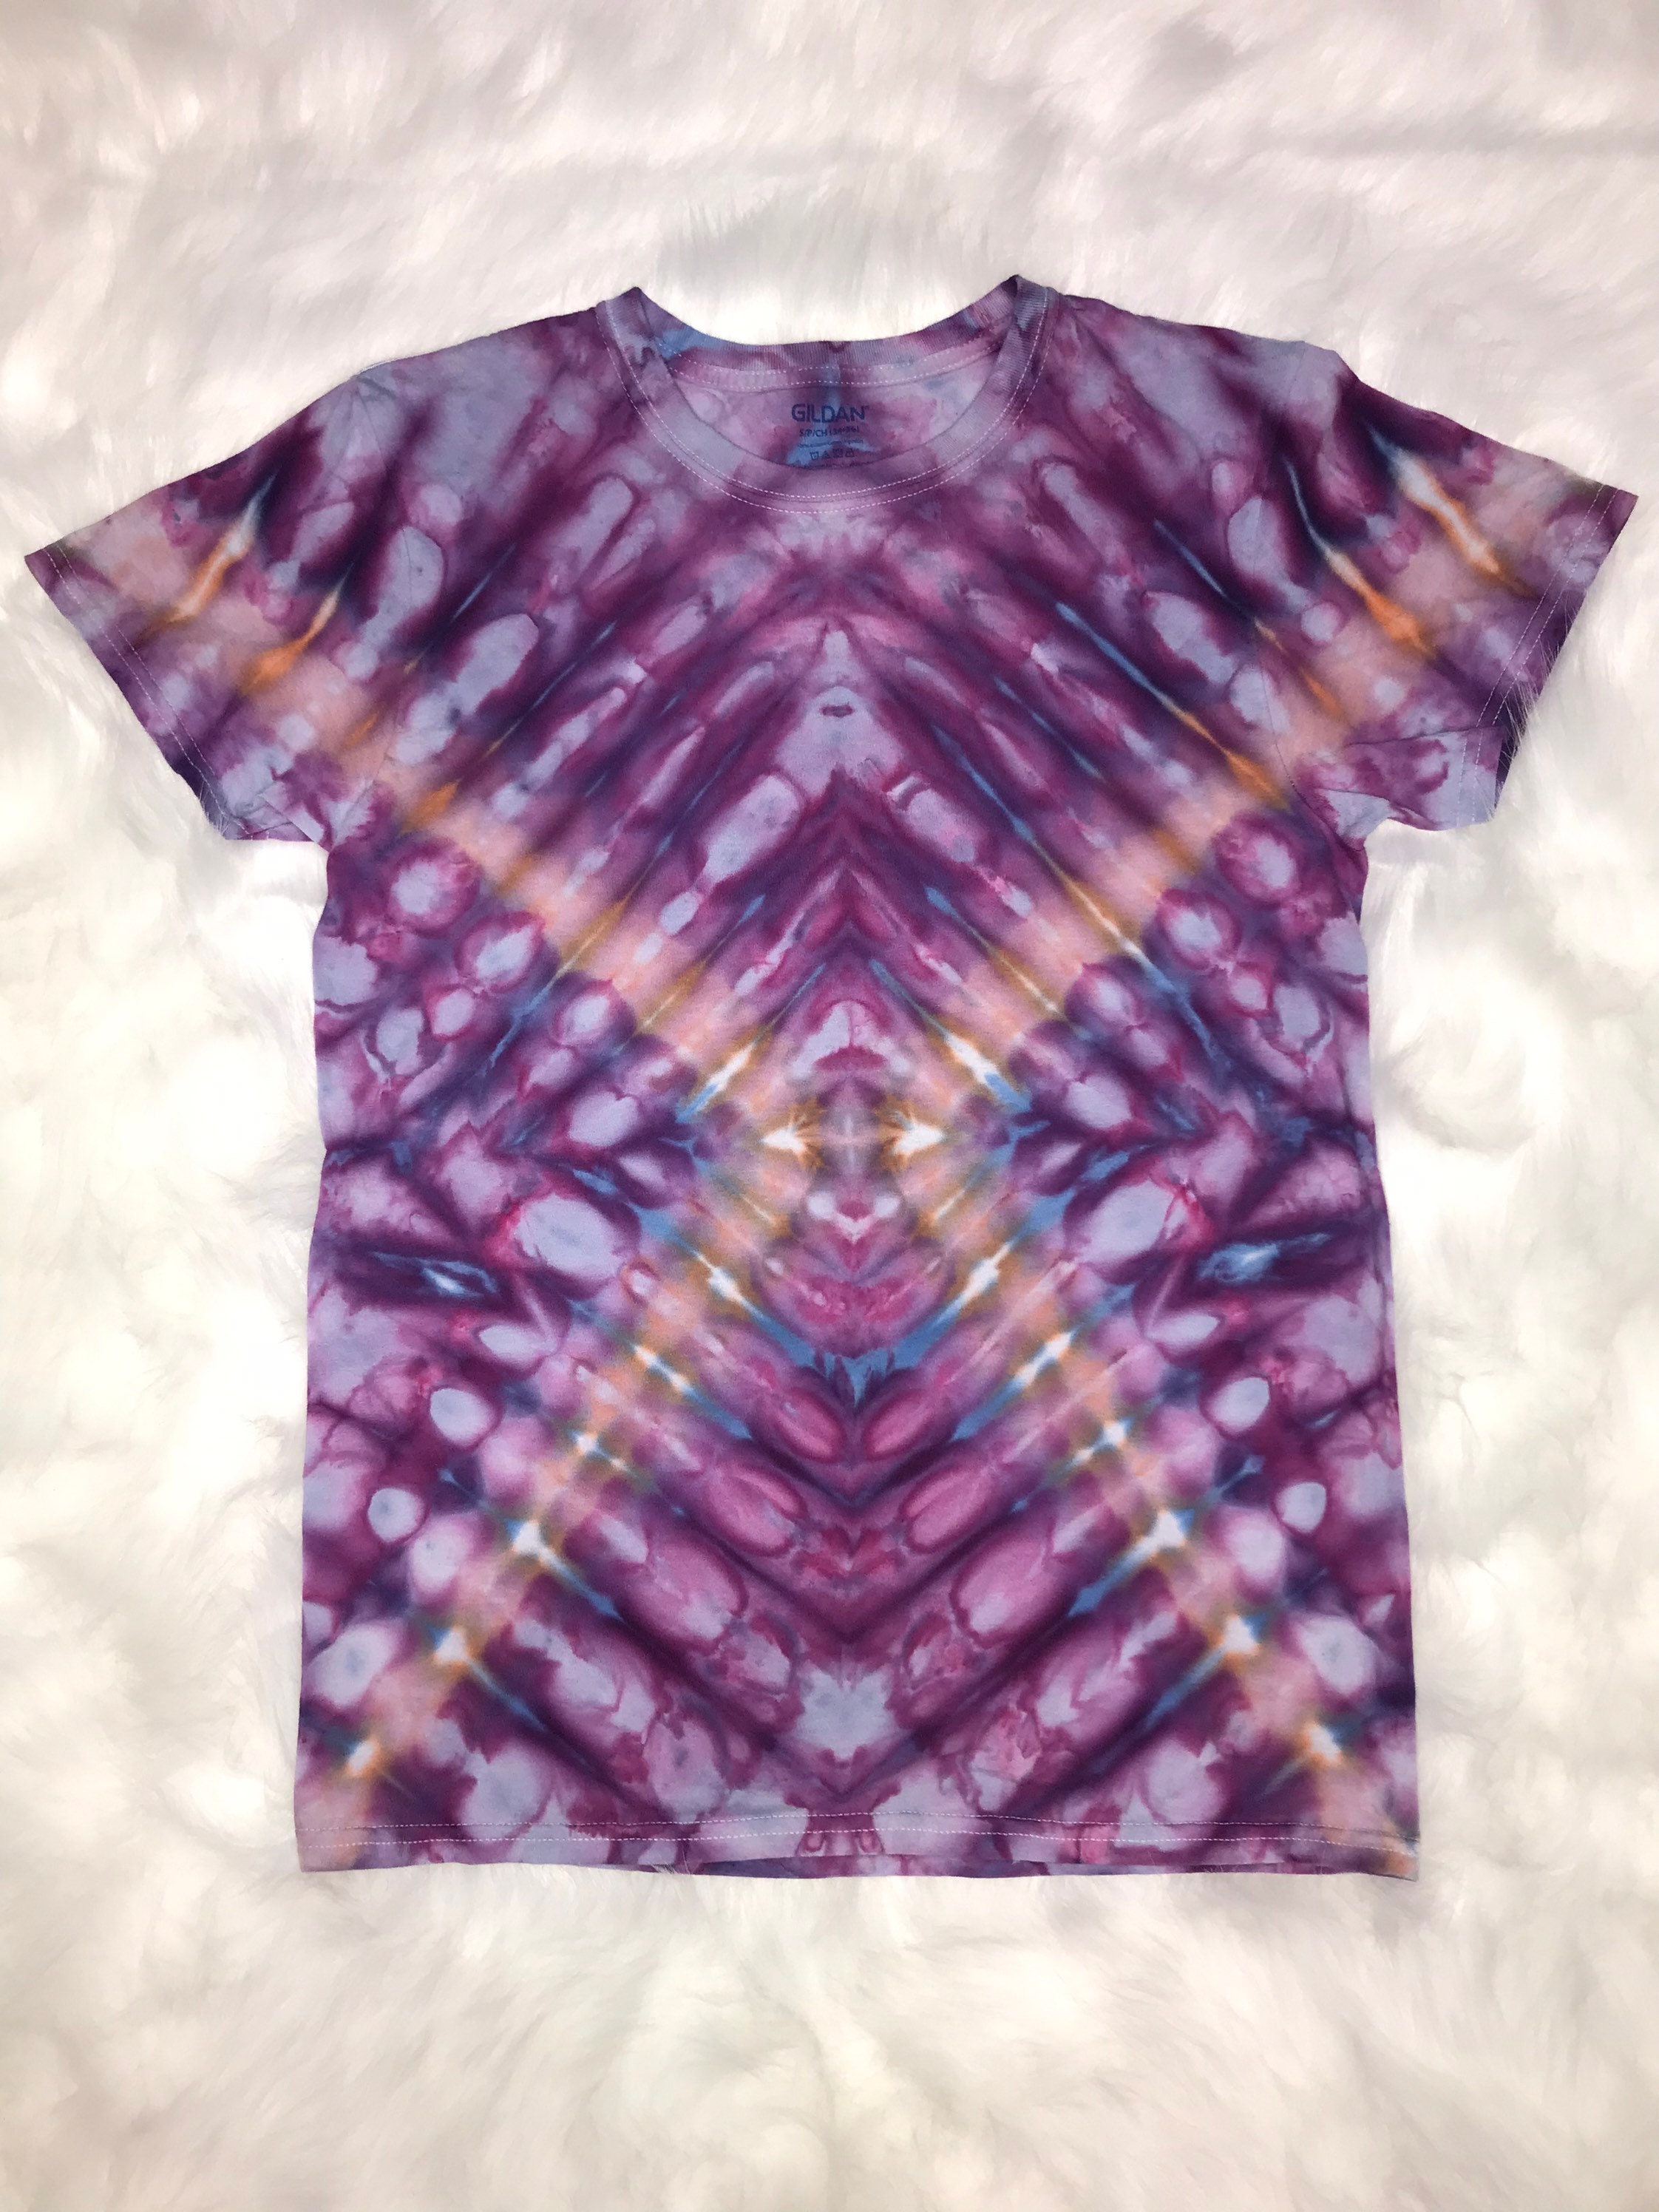 Small Handmade One Of A Kind Psychedelic Trippy Tie Dye Ice Dye Short Sleeve Shirt